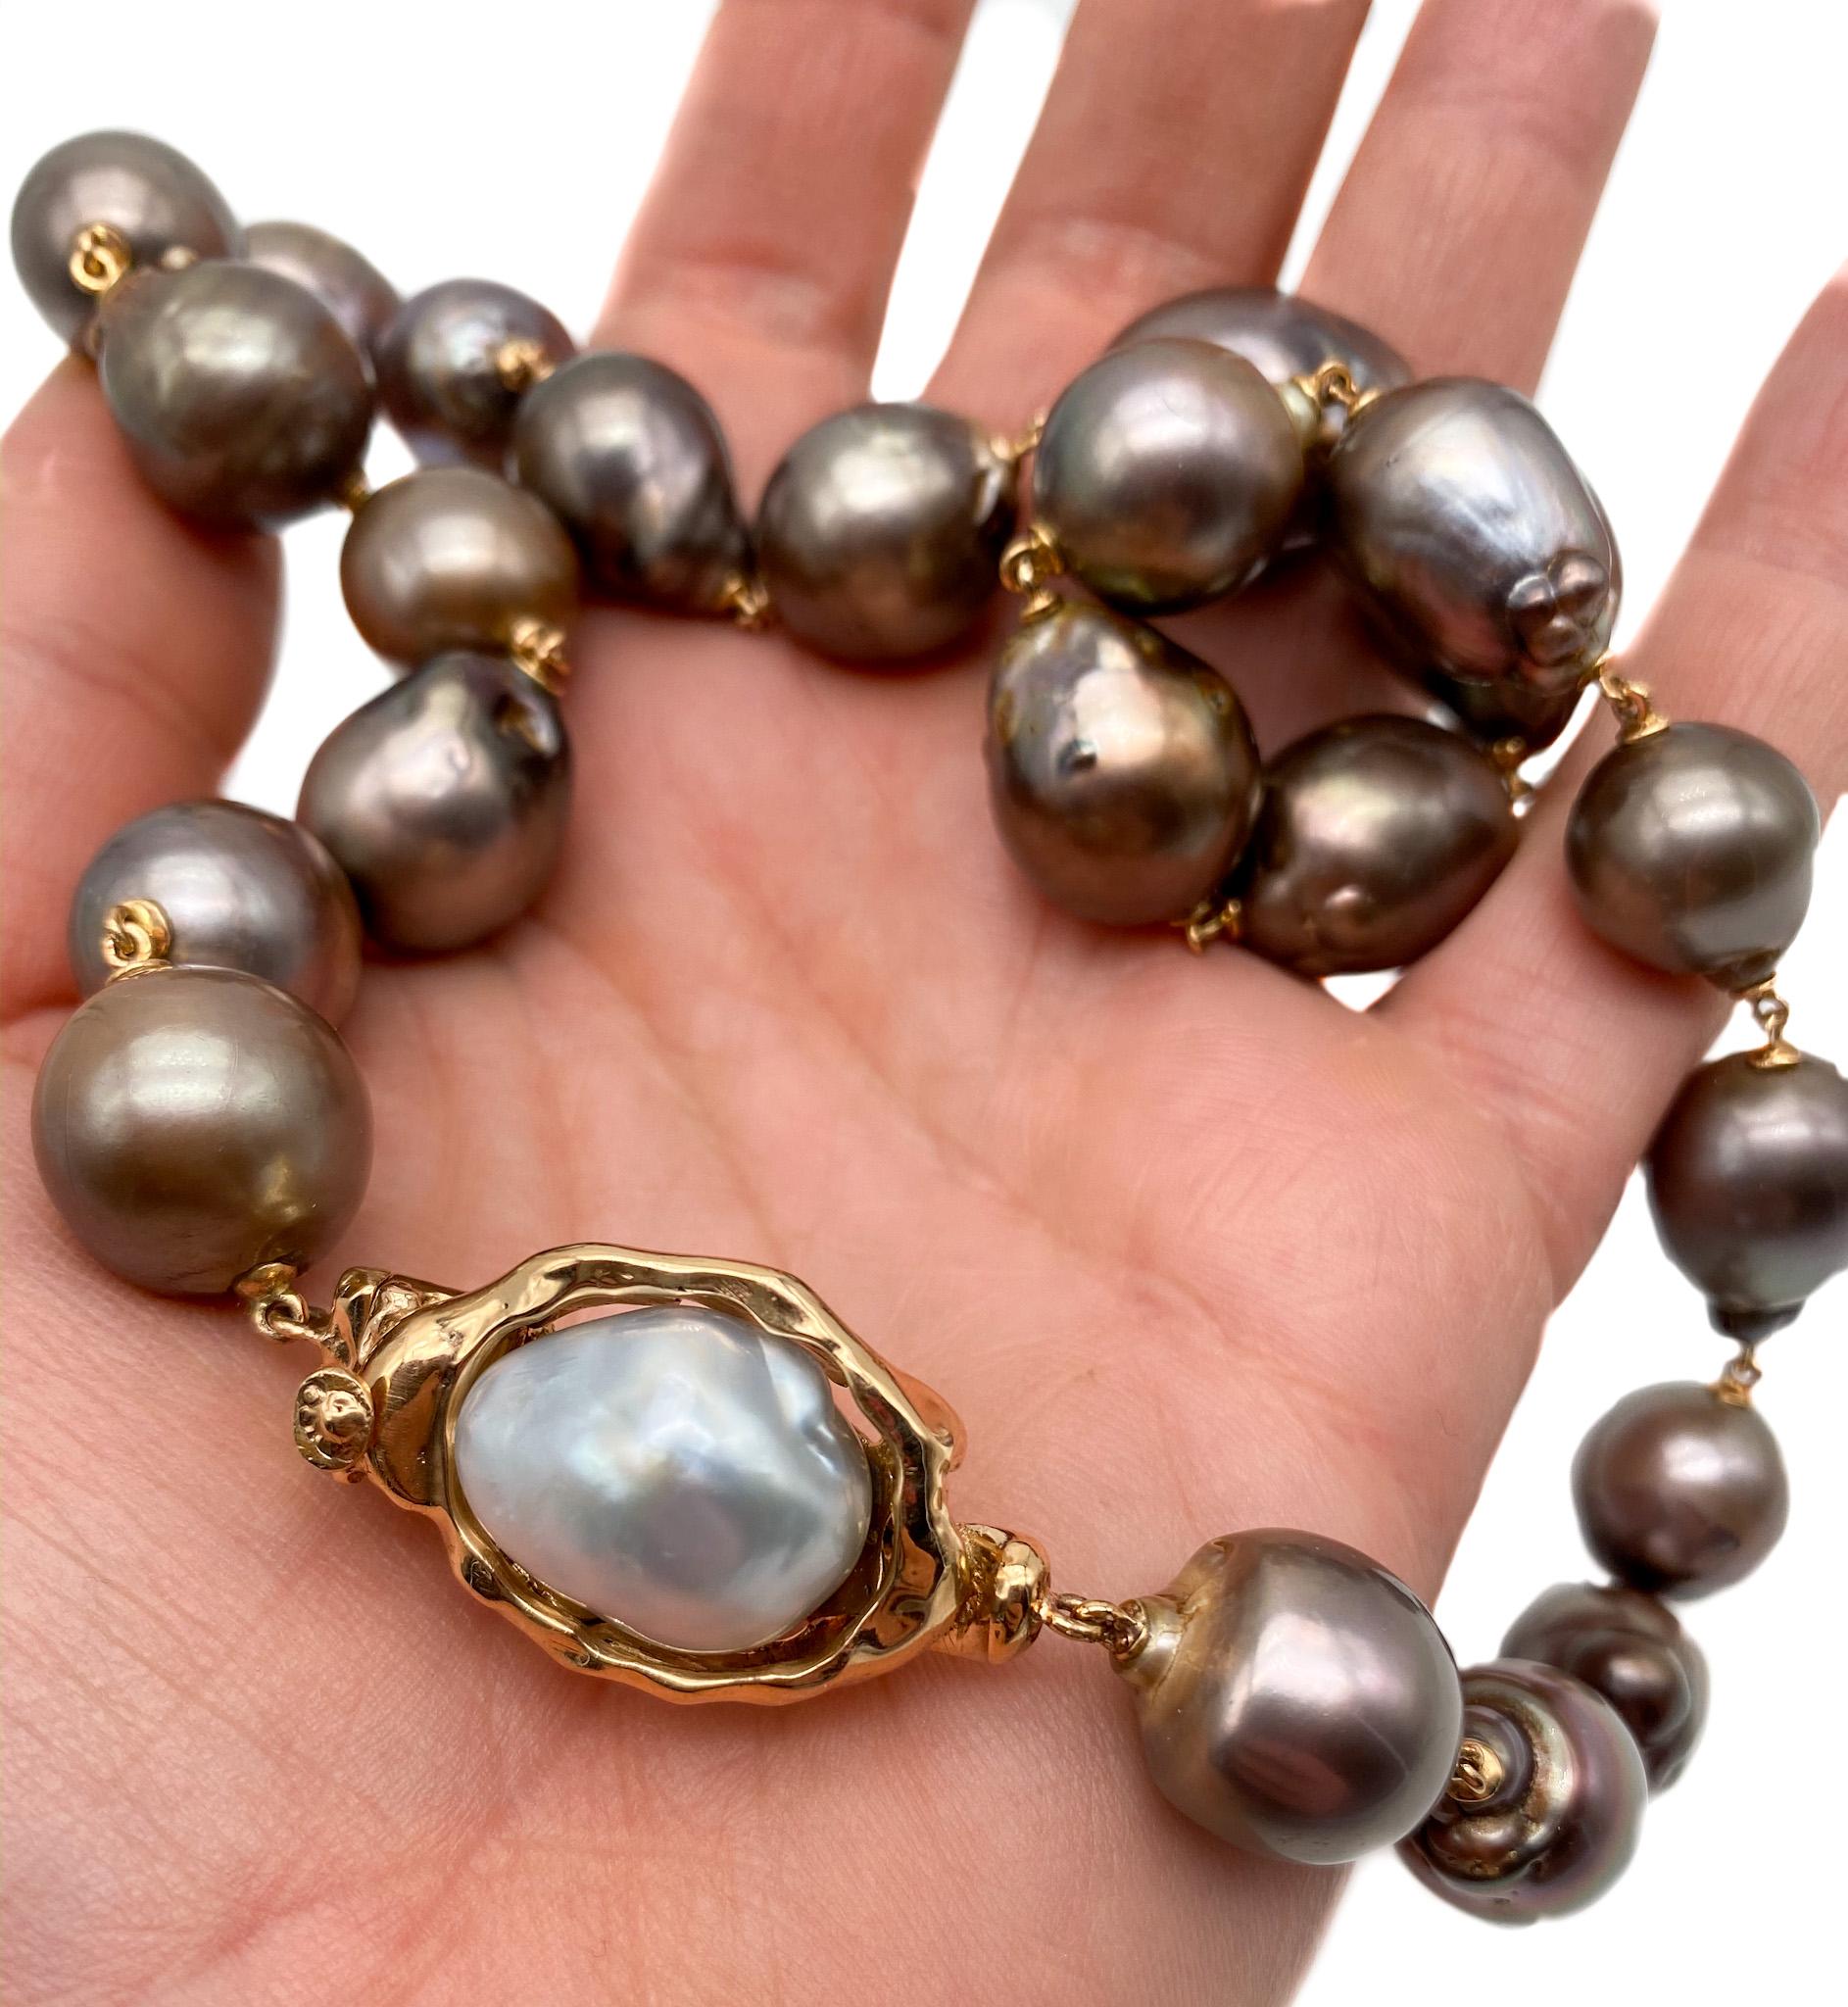 Women's or Men's Chocolate Tahitian Pearls Necklace 18K Gold Clasp with Australian Baroque Pearl For Sale